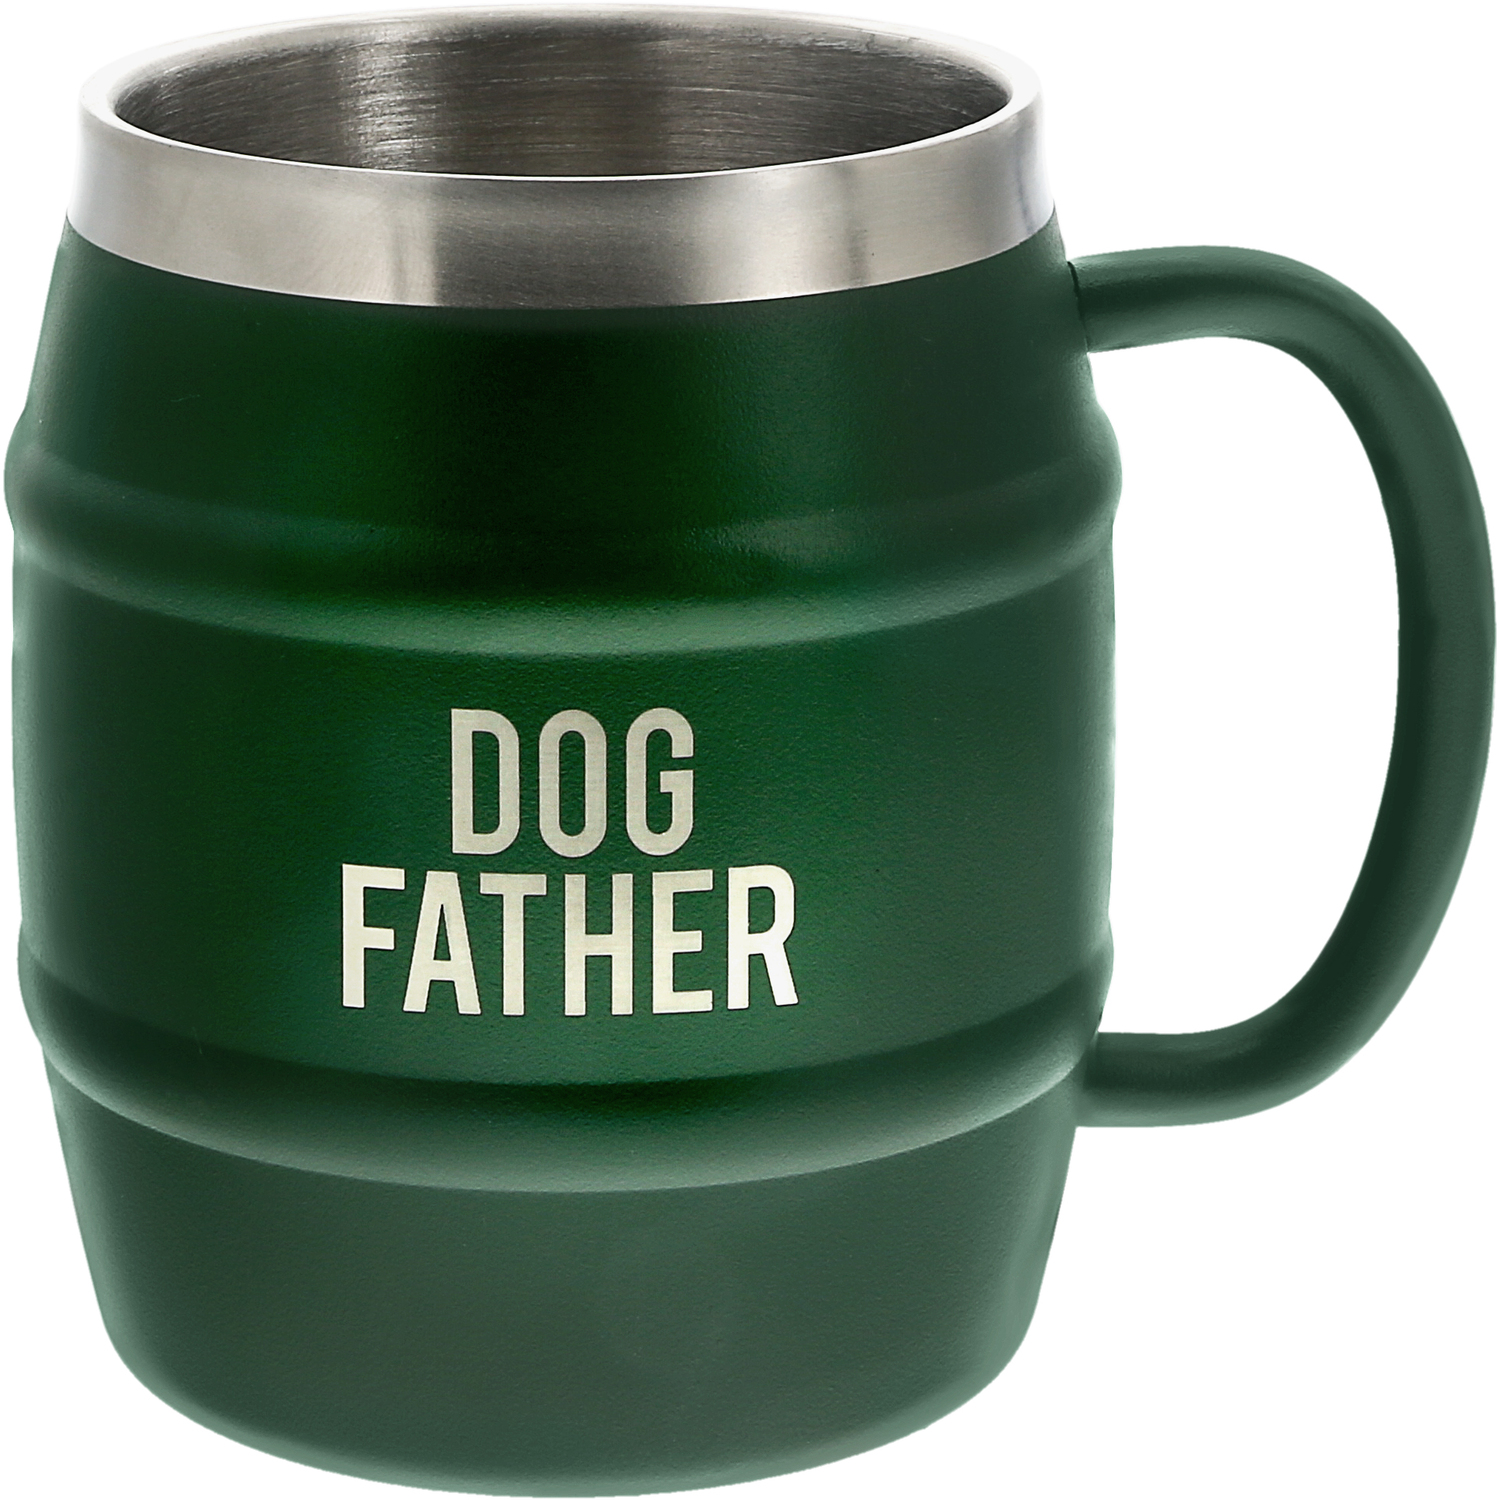 Dog Father by Man Made - Dog Father - 15 oz Stainless Steel Double Wall Stein